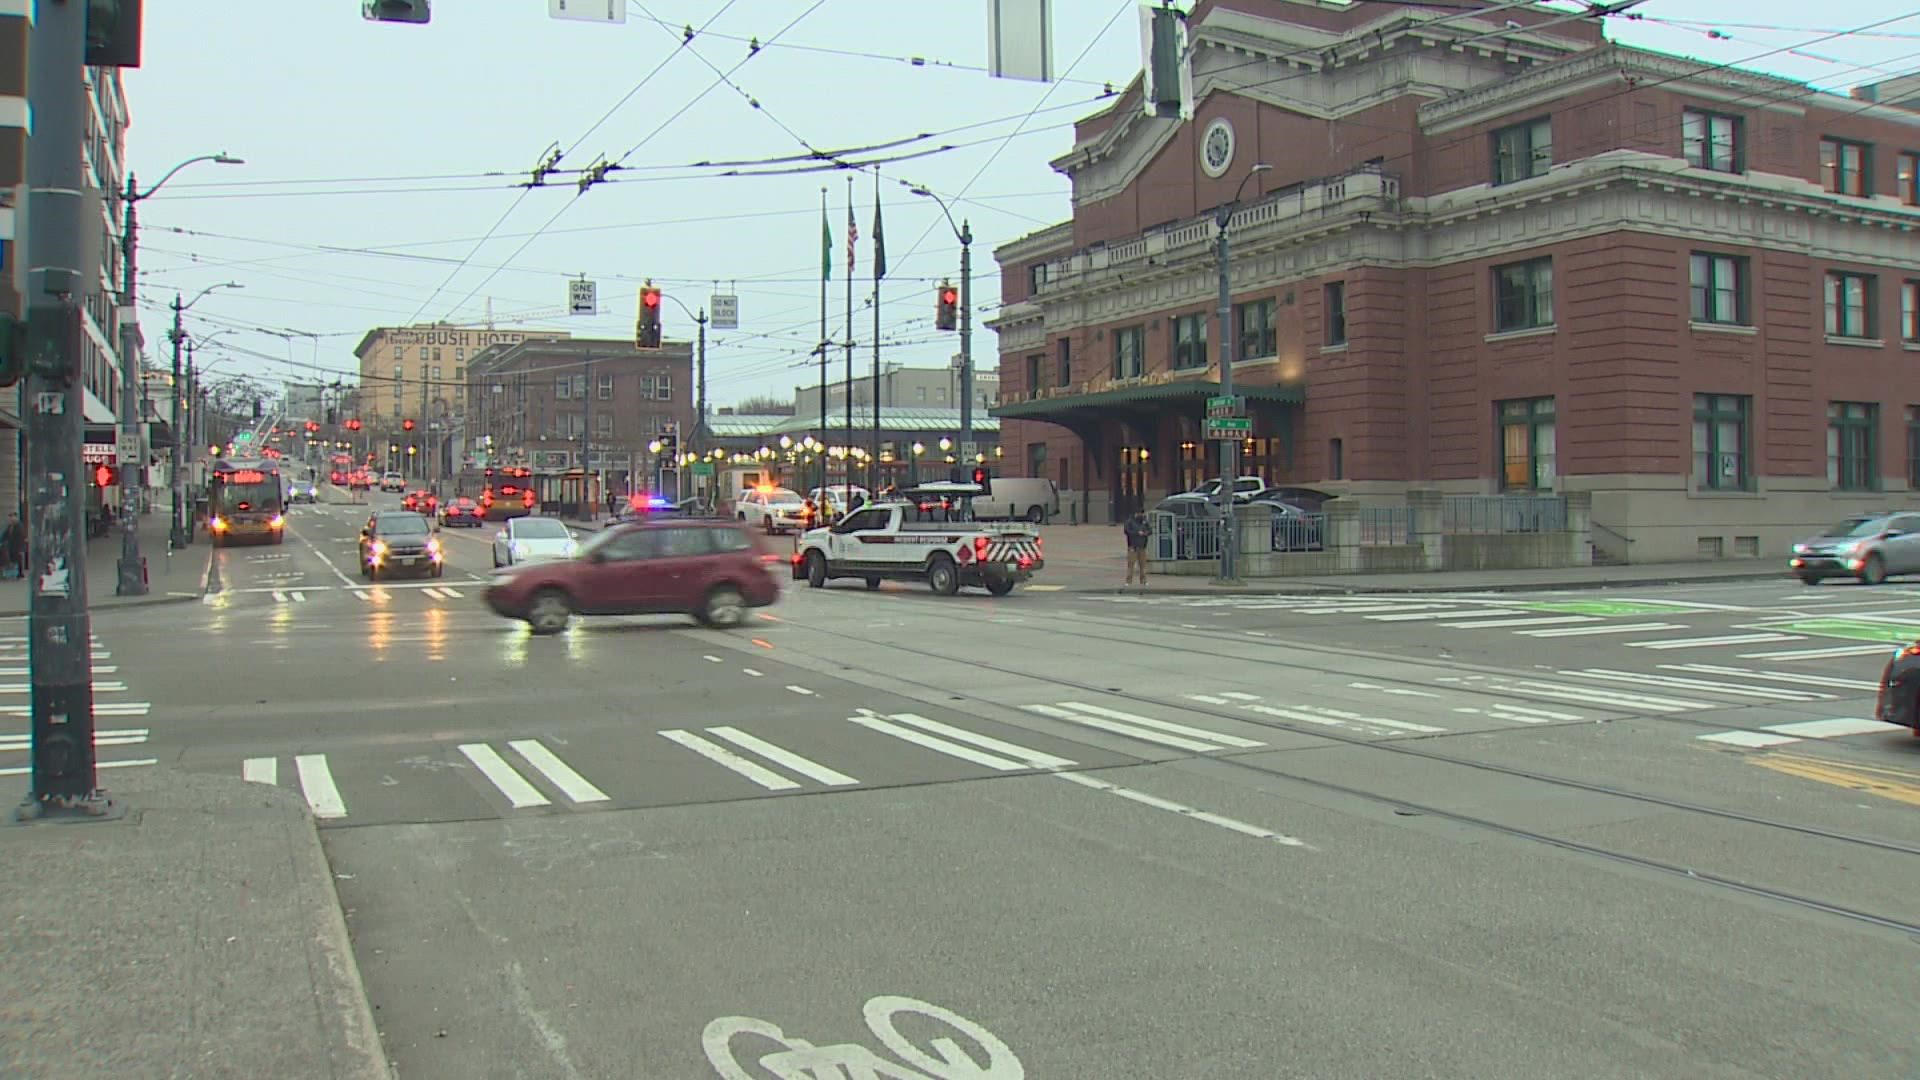 A man and a 10-year-old boy are in stable condition after being struck by a car near 4th and Jackson in Seattle